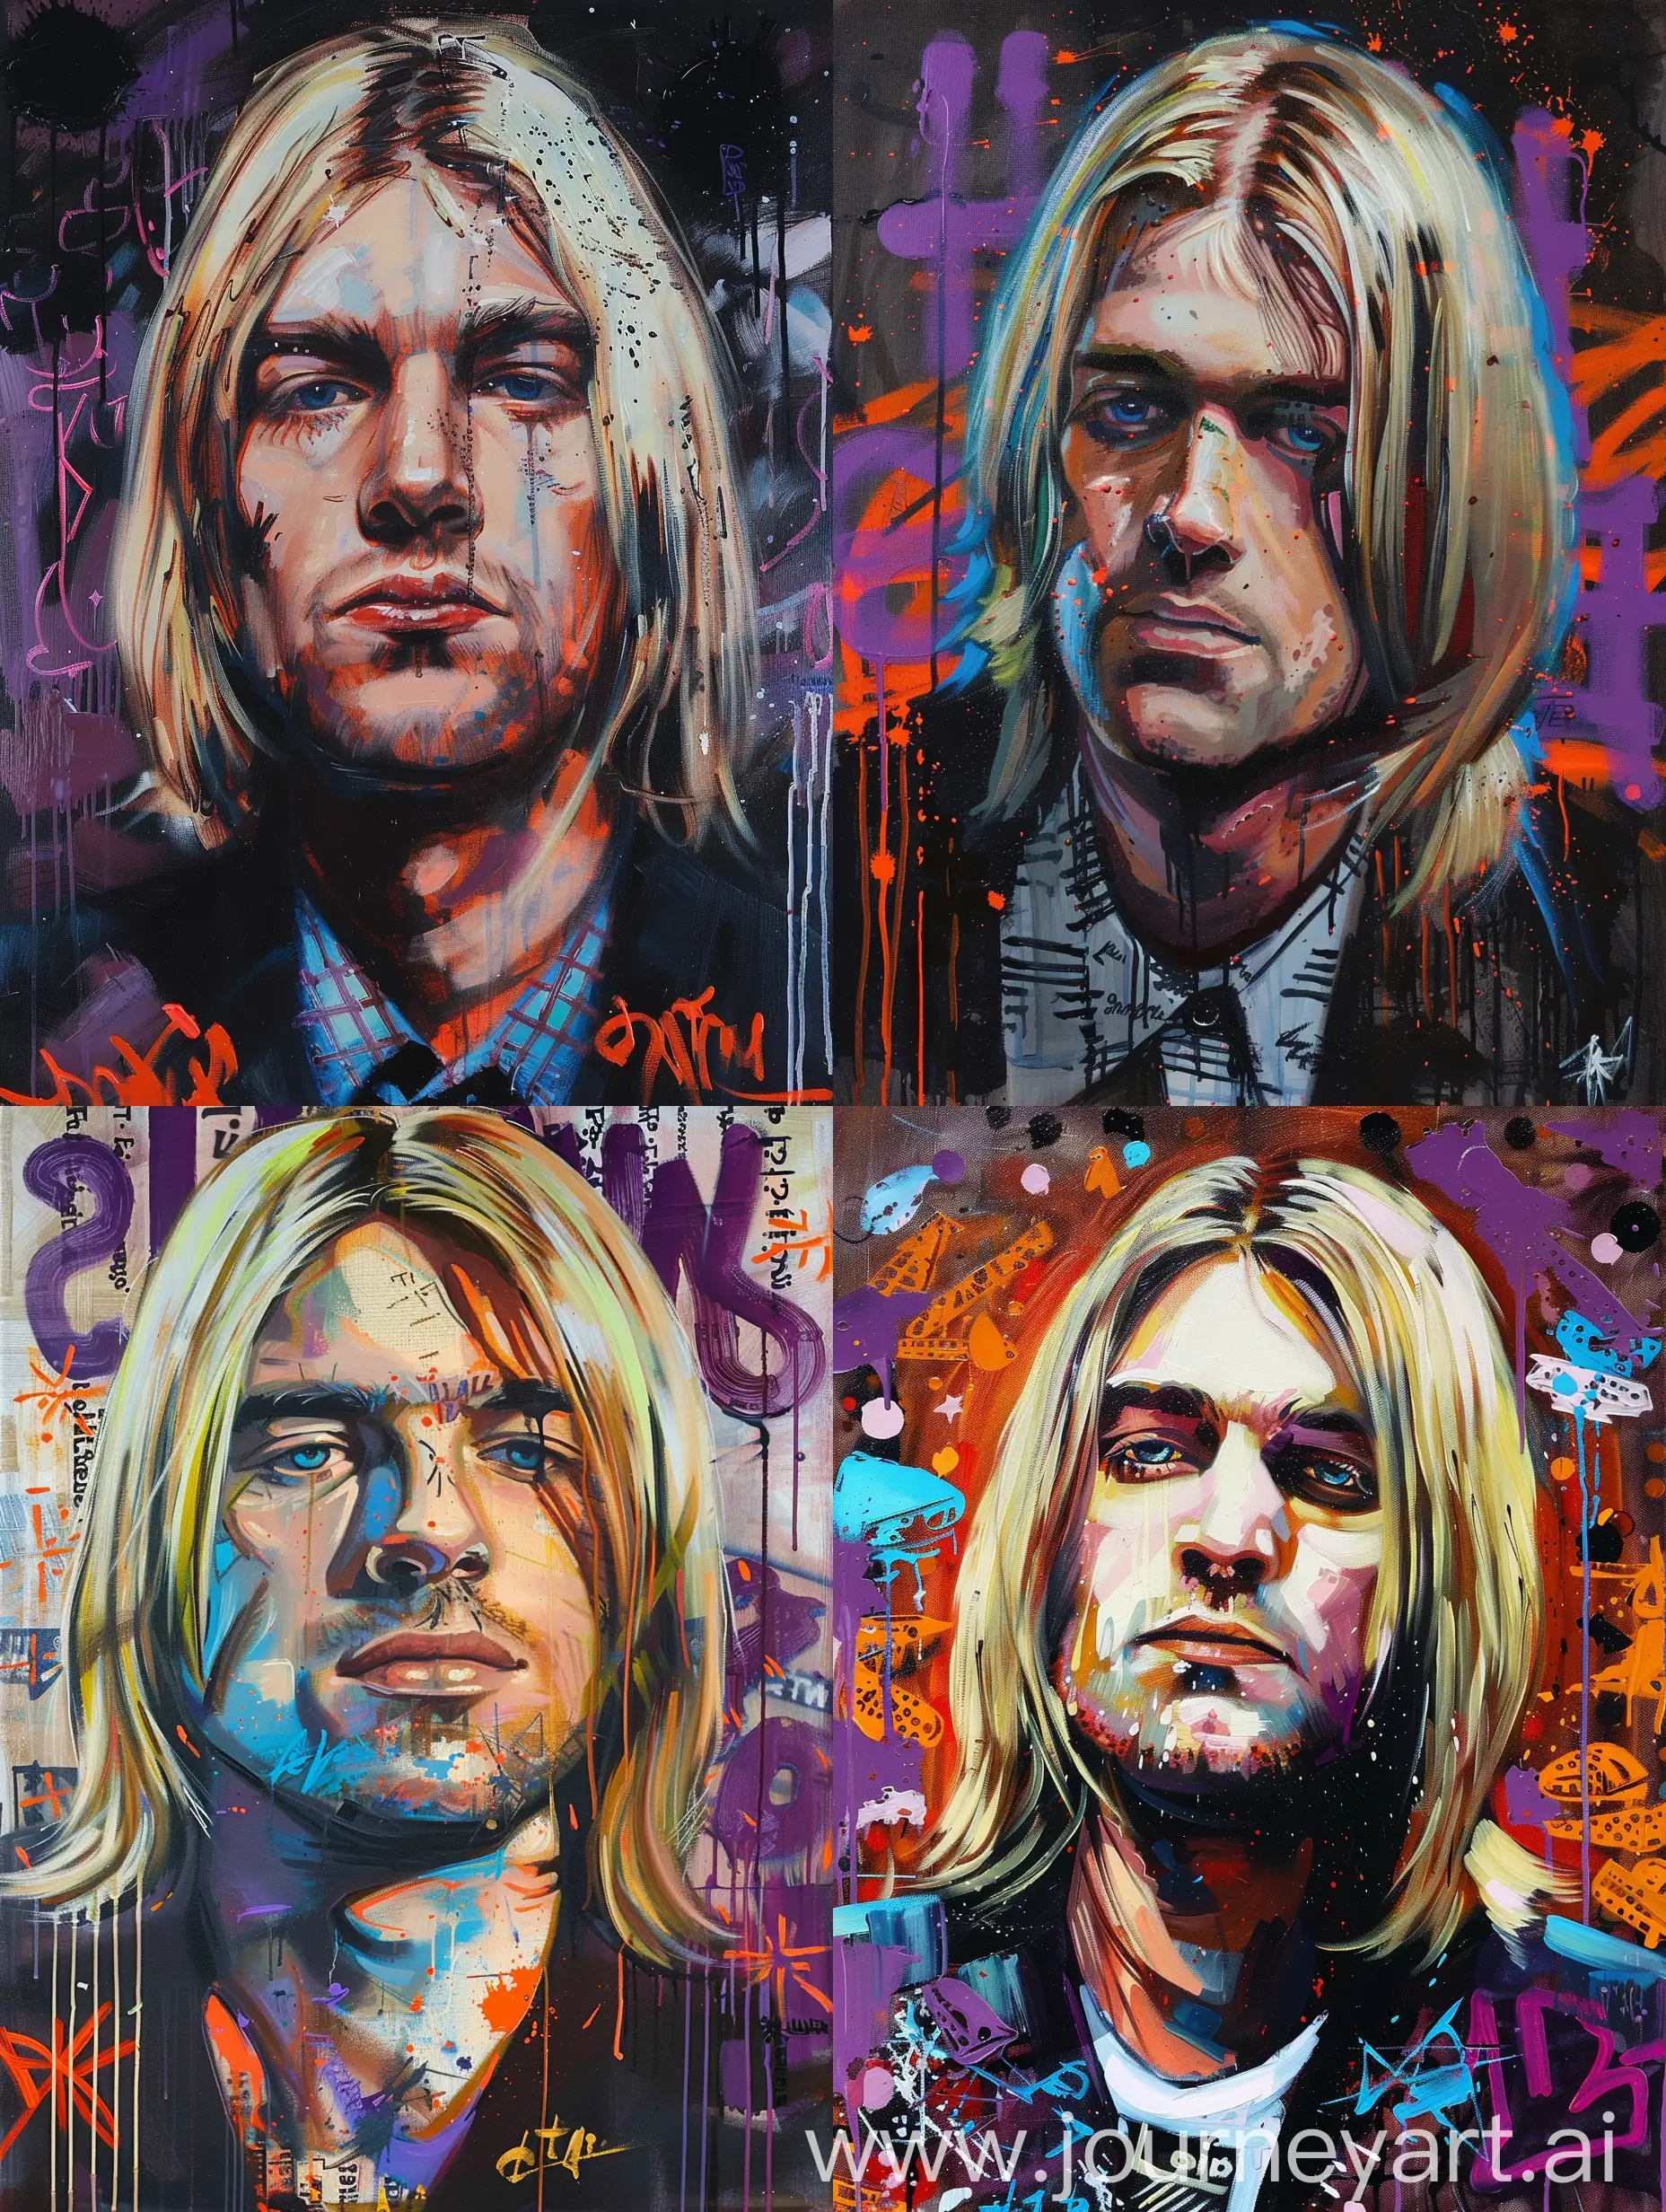 Iconic-Oil-Painting-of-Kurt-Cobain-Capturing-His-Legacy